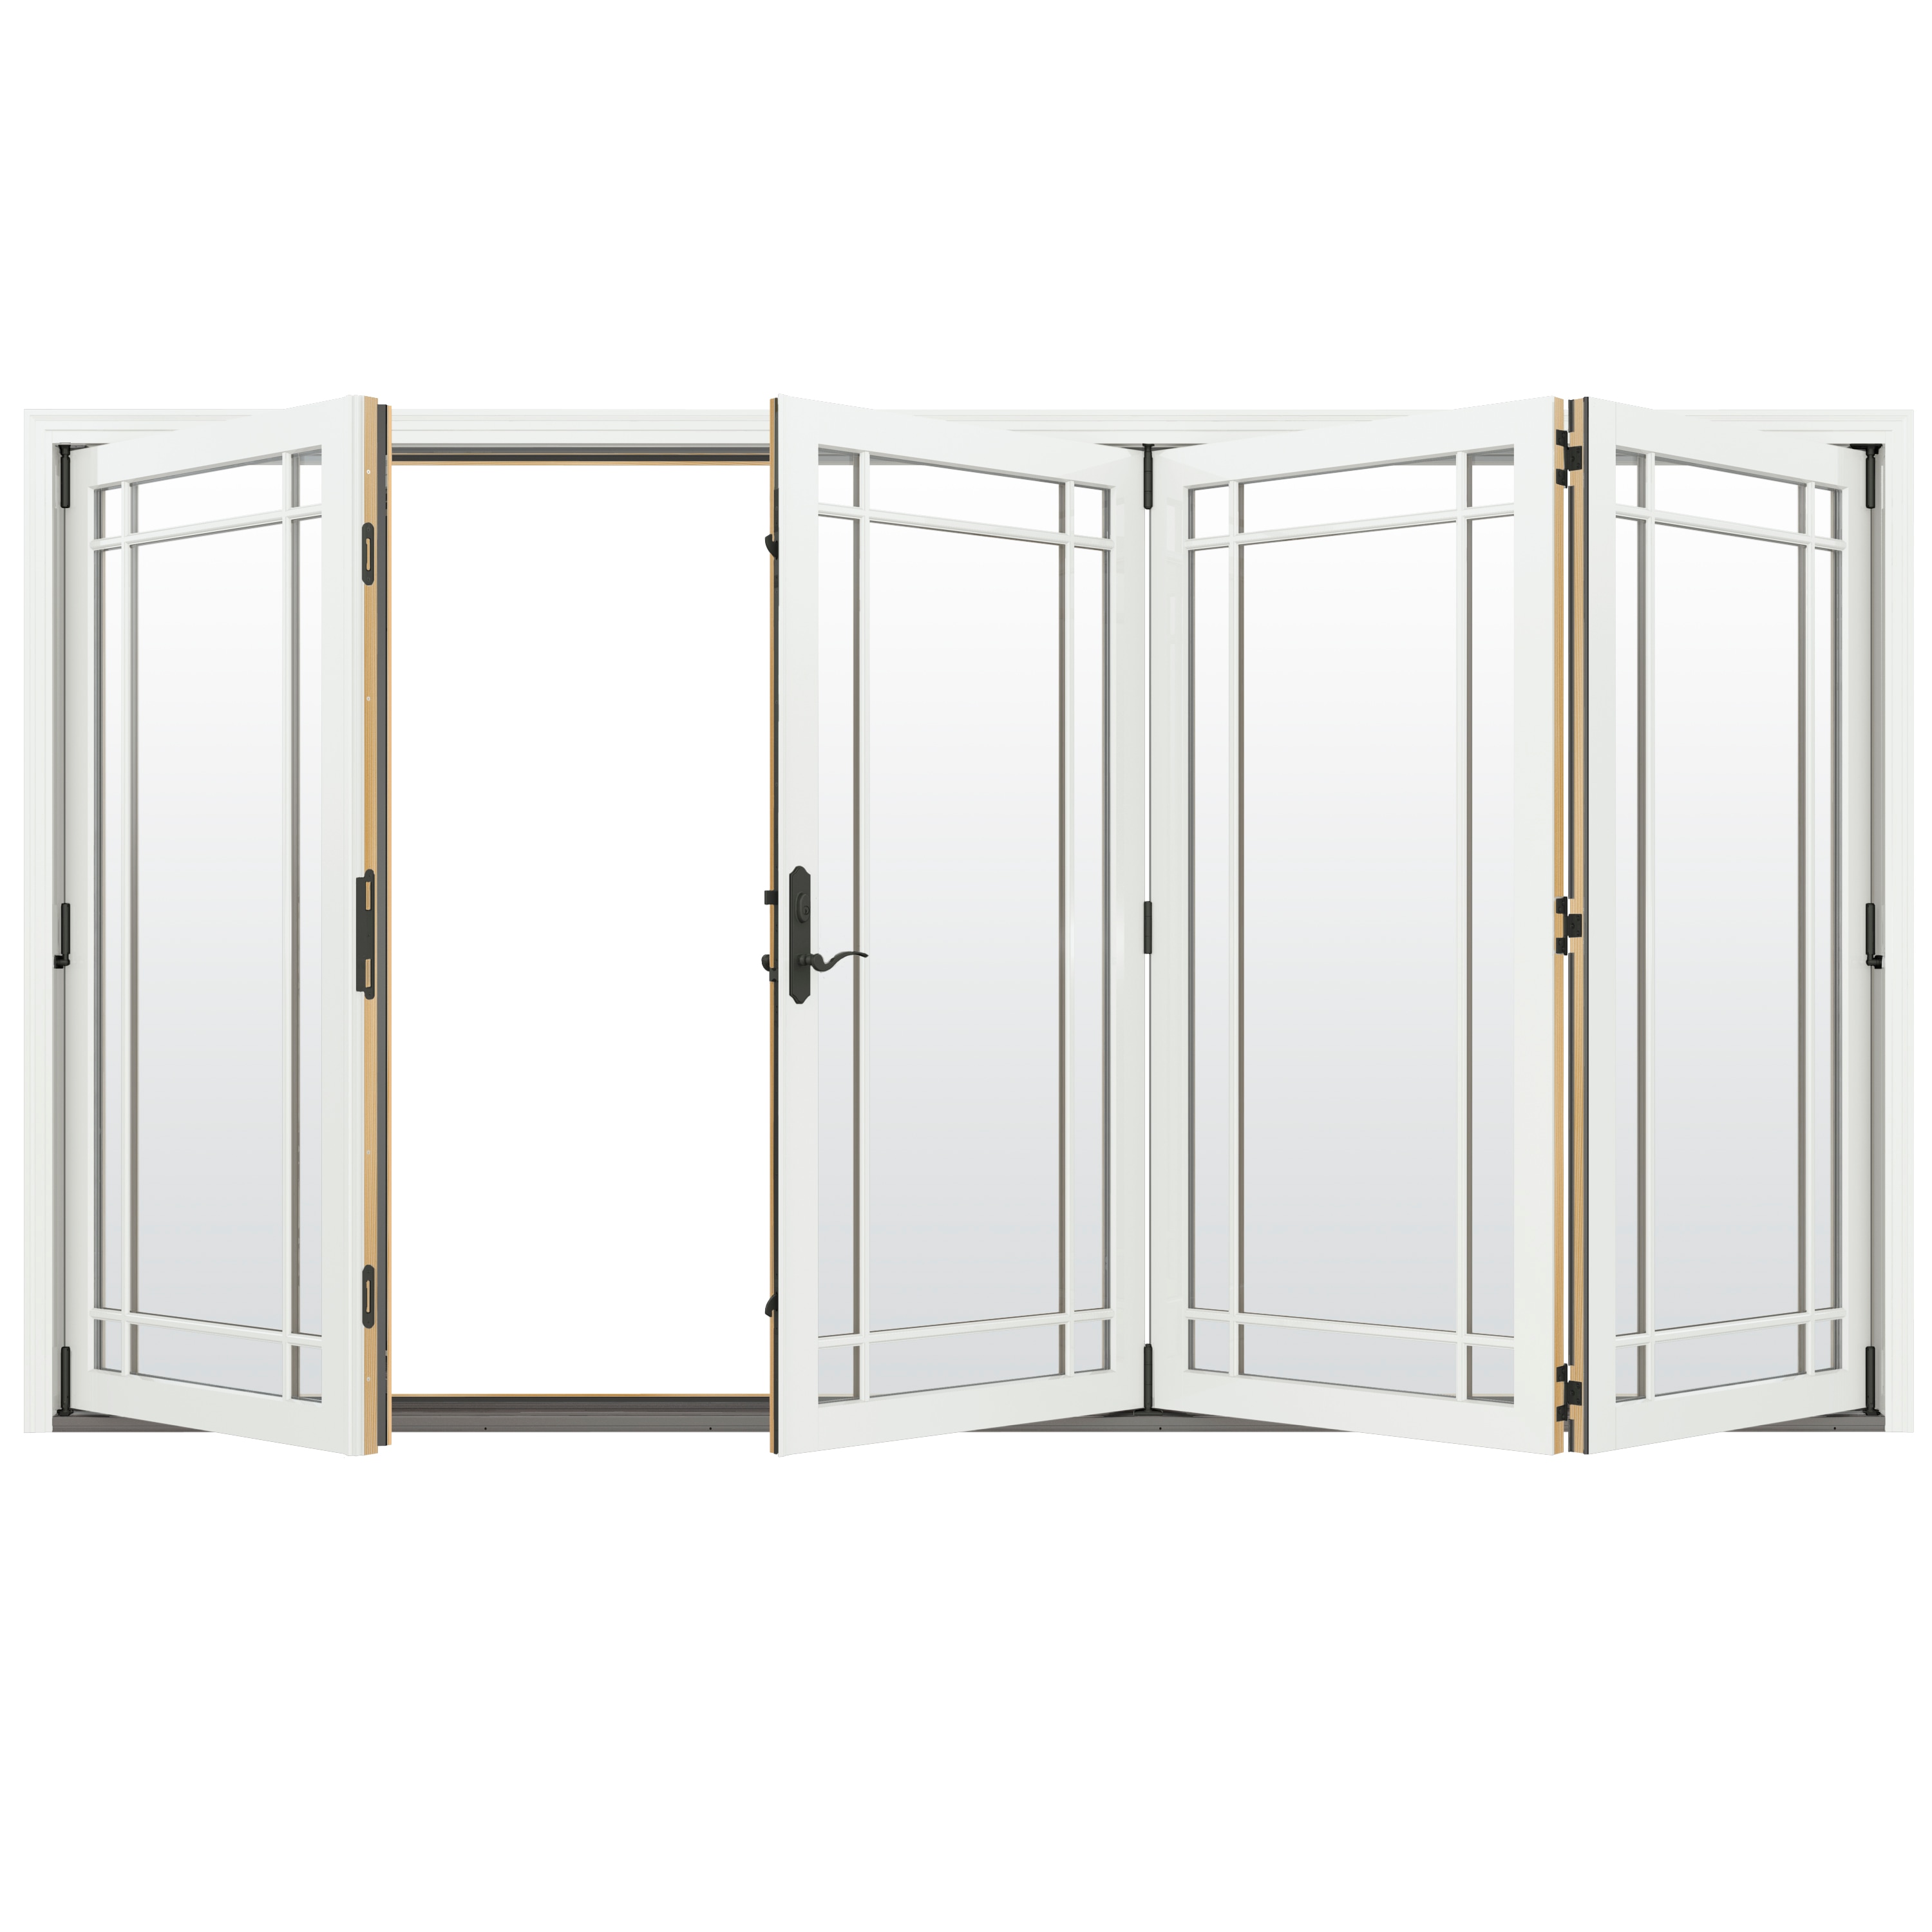 124-in x 96-in Low-e Argon Simulated Divided Light White Clad-wood Folding Right-Hand Outswing Patio Door | - JELD-WEN LOWOLJW247800046